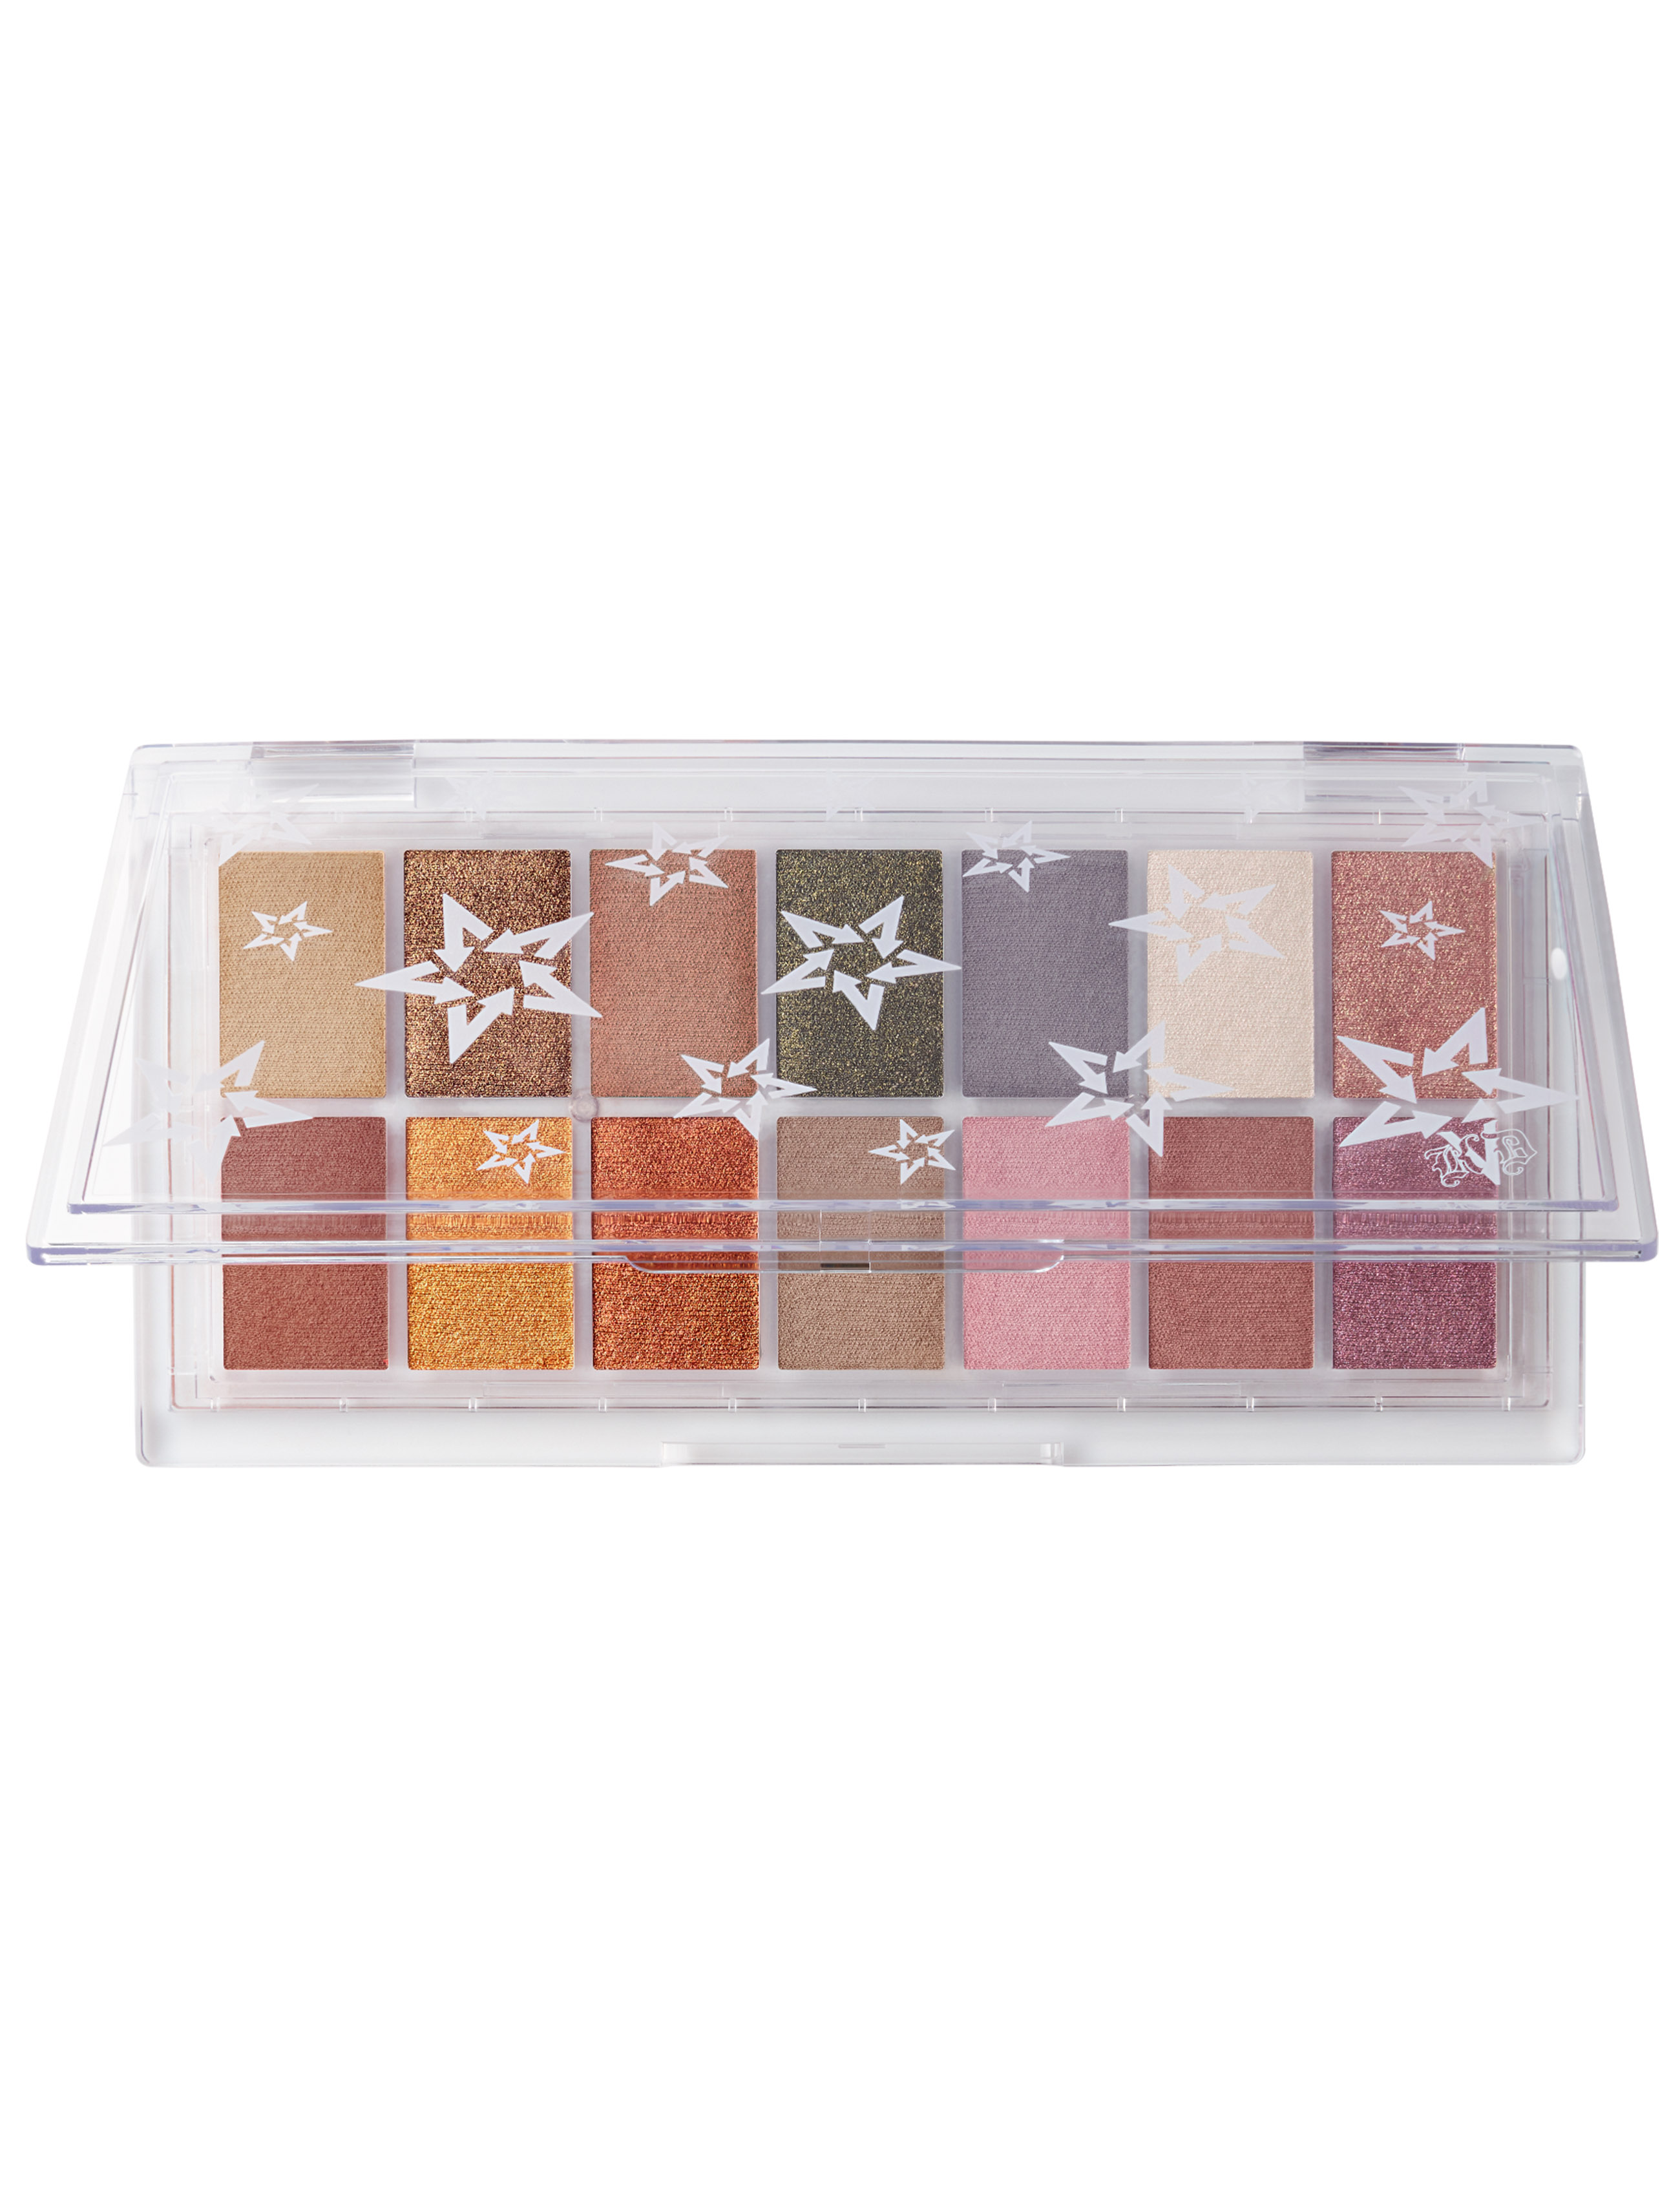  Fully Recycled Palette Planet Fanatic Eyeshadow Palette